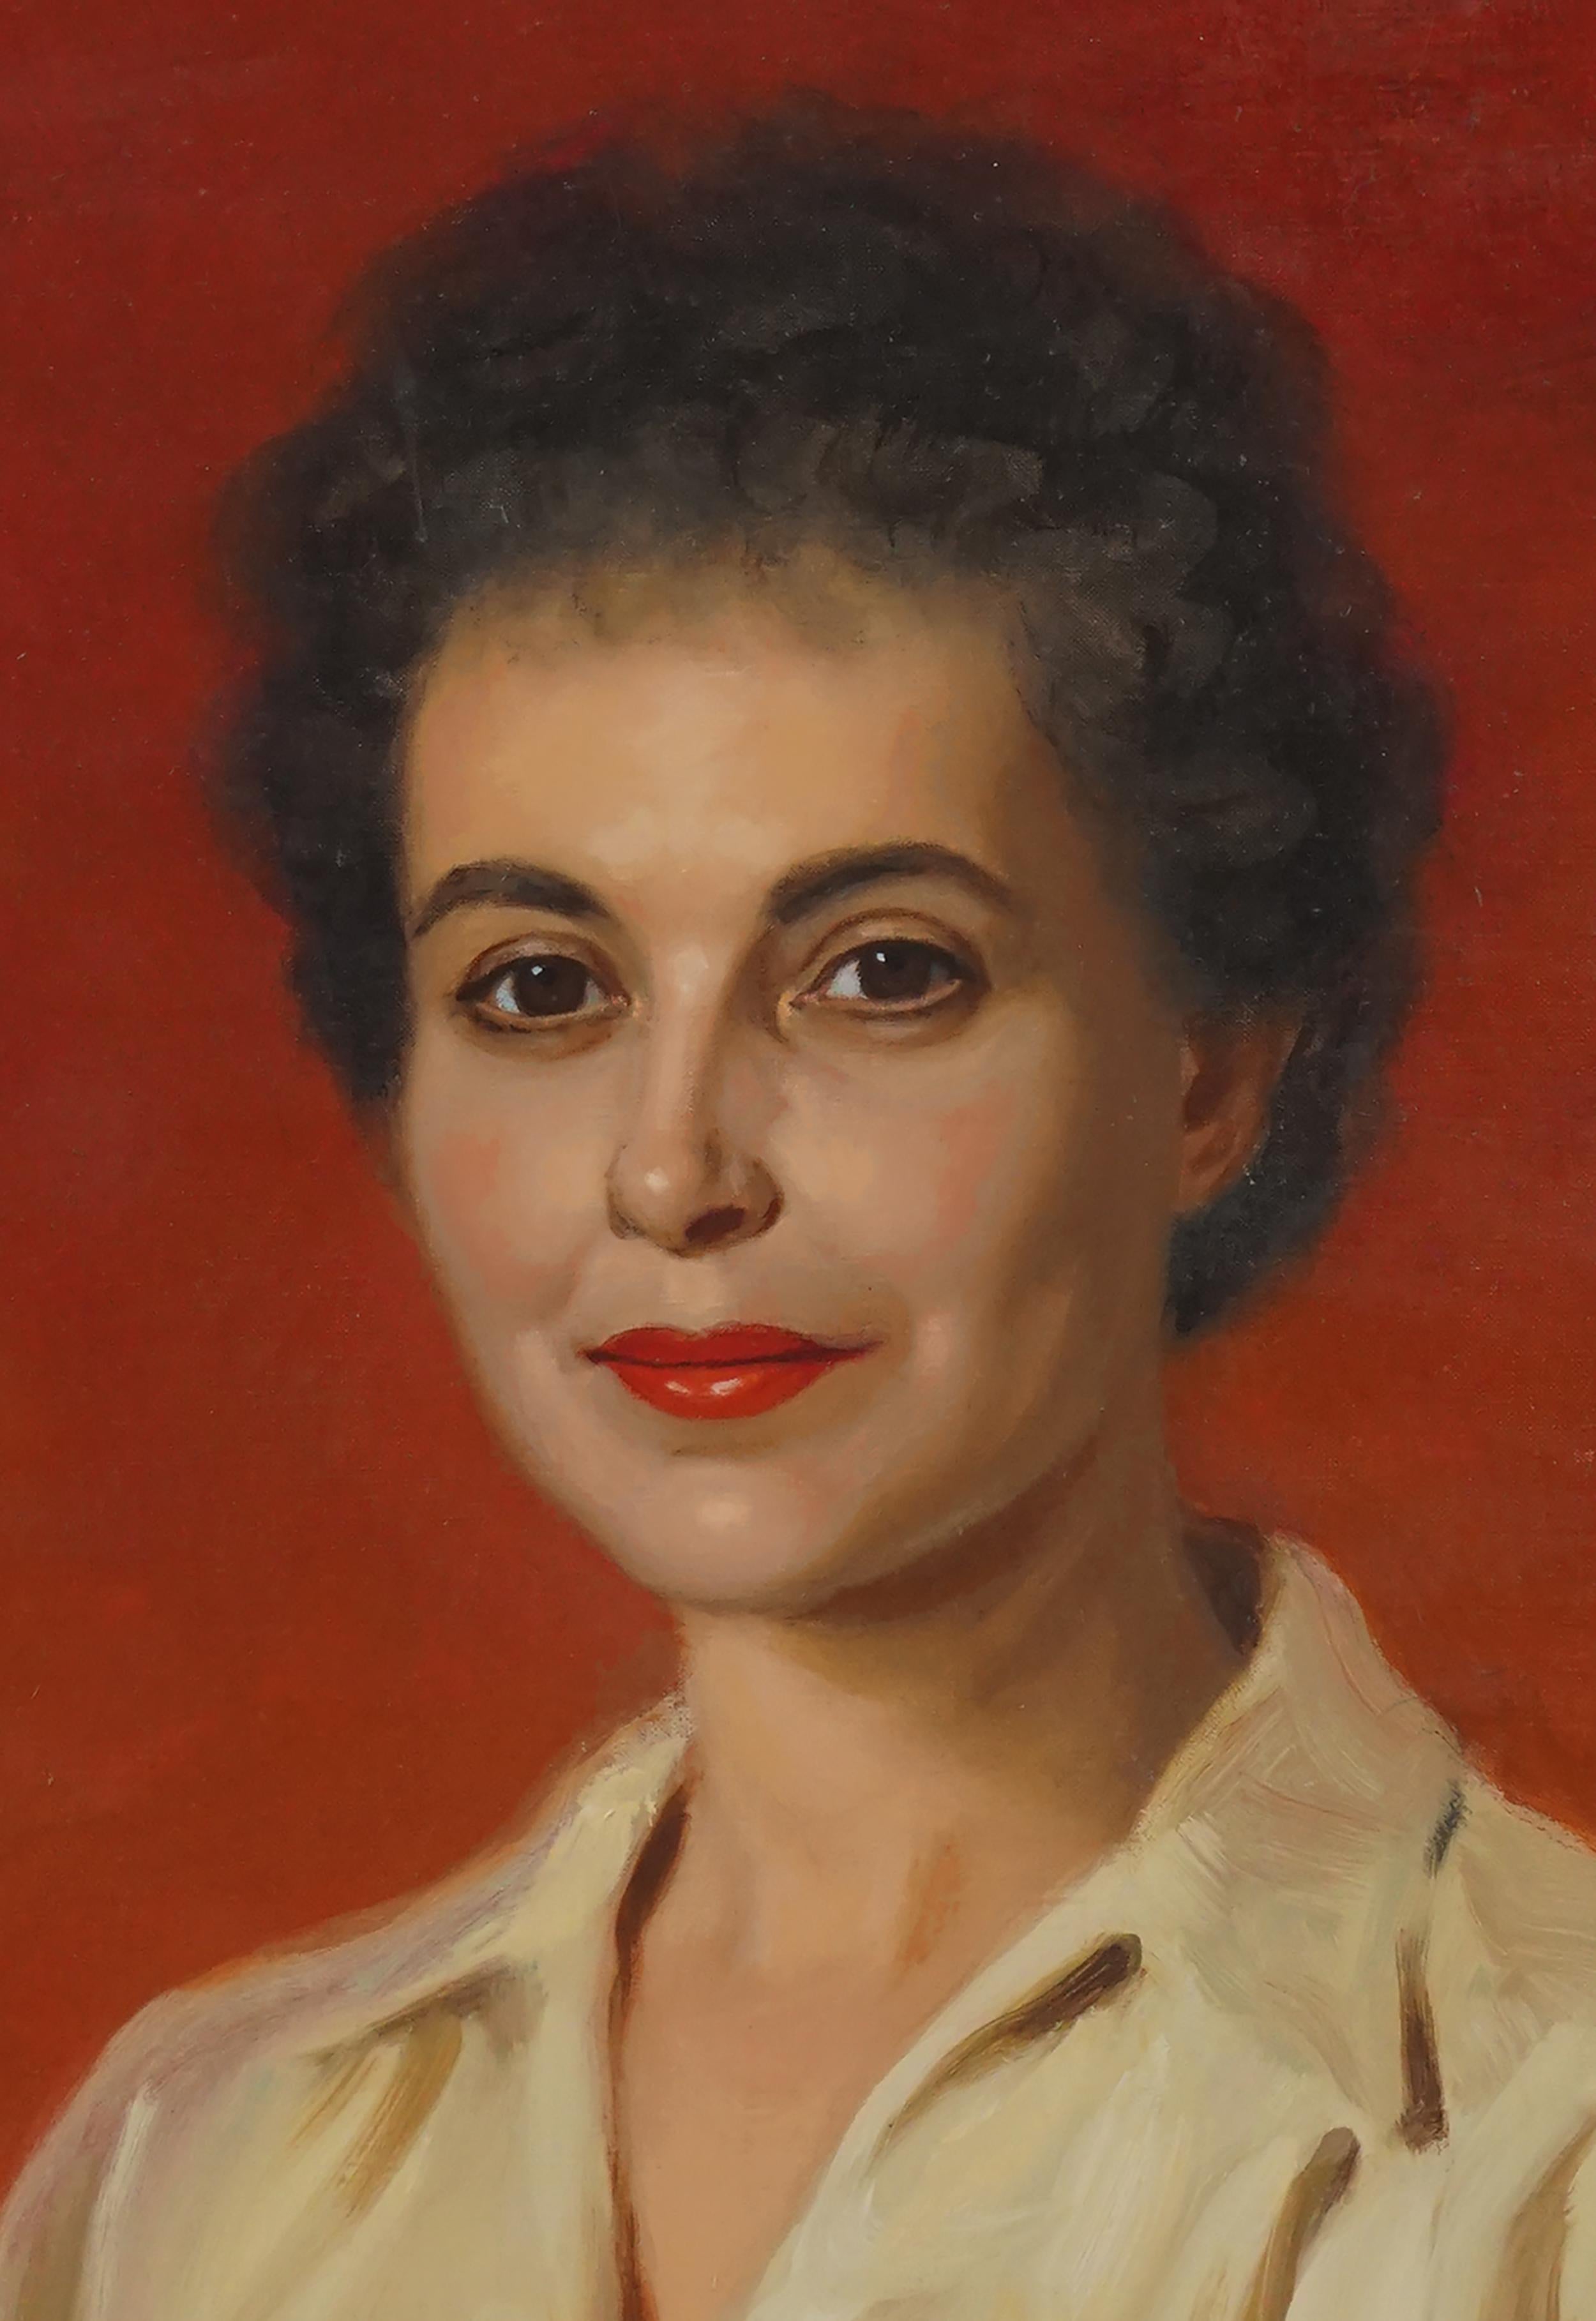 Wonderful portrait of woman from San Francisco by European portrait artist Alfred Jonniaux (Belgian/American, 1882-1974), circa 1950s. Signed on verso. Presented in vintage gilt-toned wood frame. Image size: 20